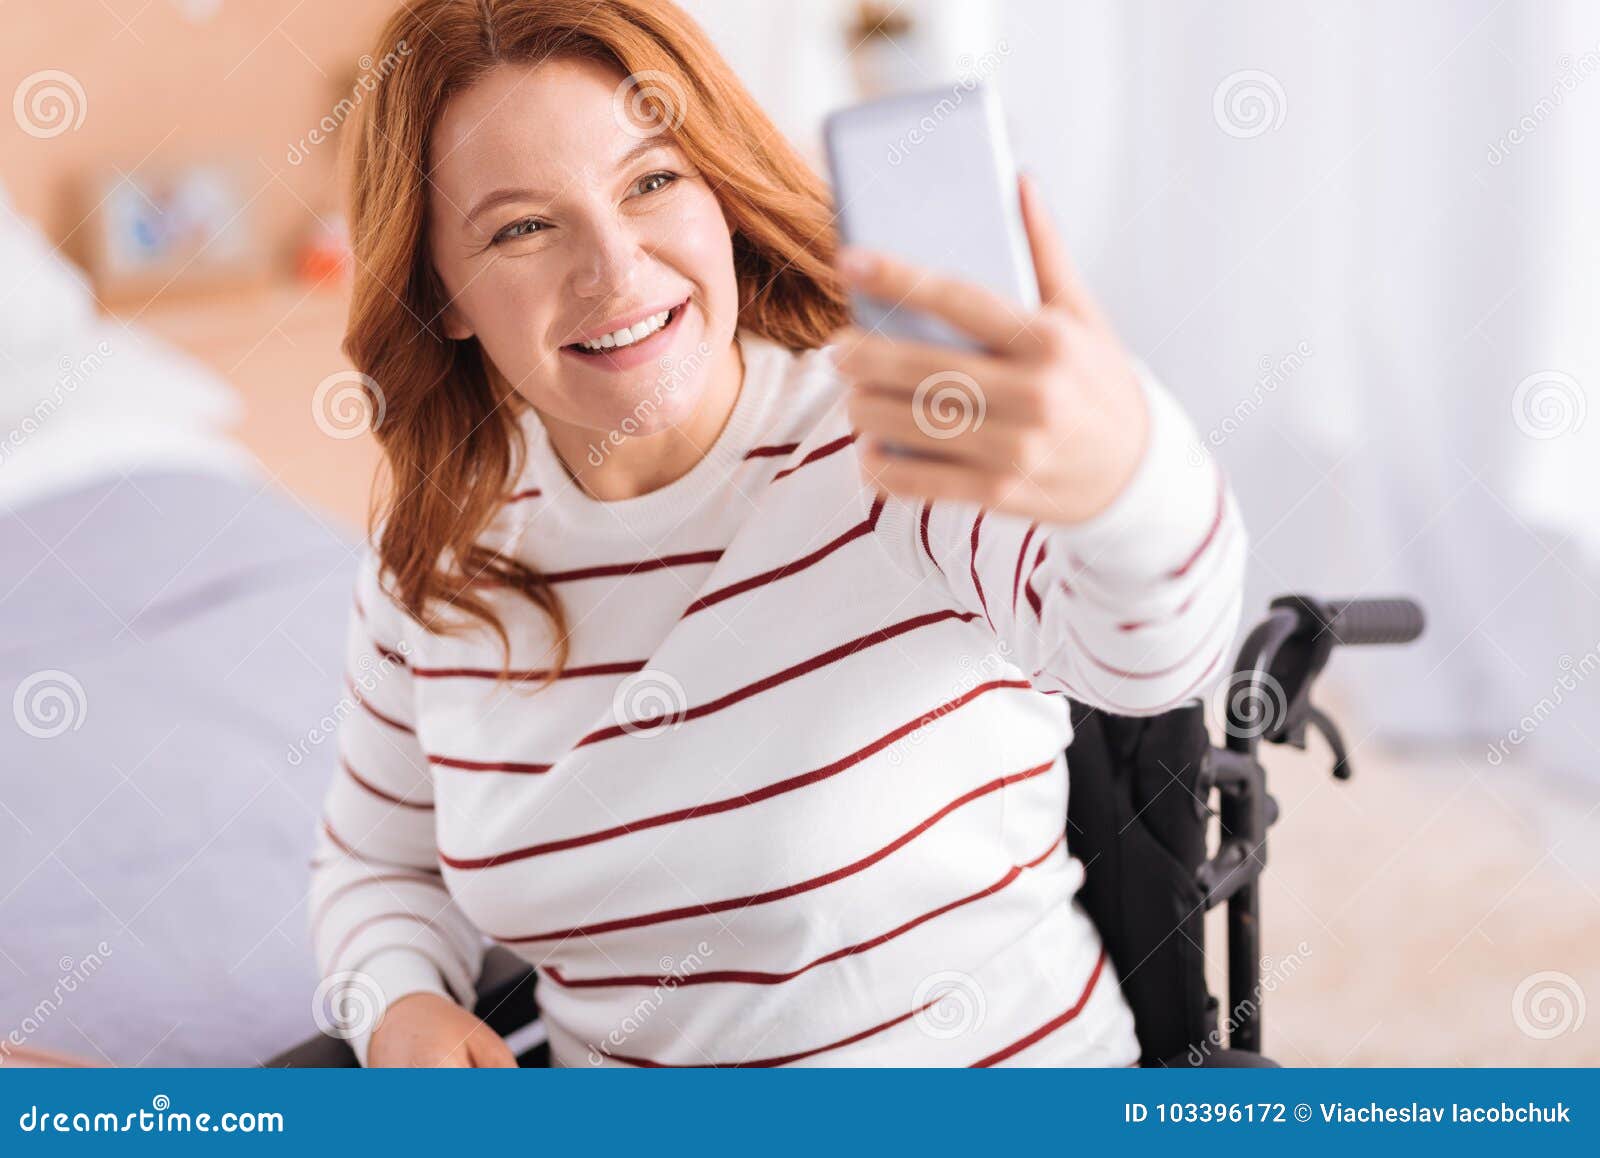 Alert Incapacitated Woman Taking Pictures Stock Photo - Image of ...